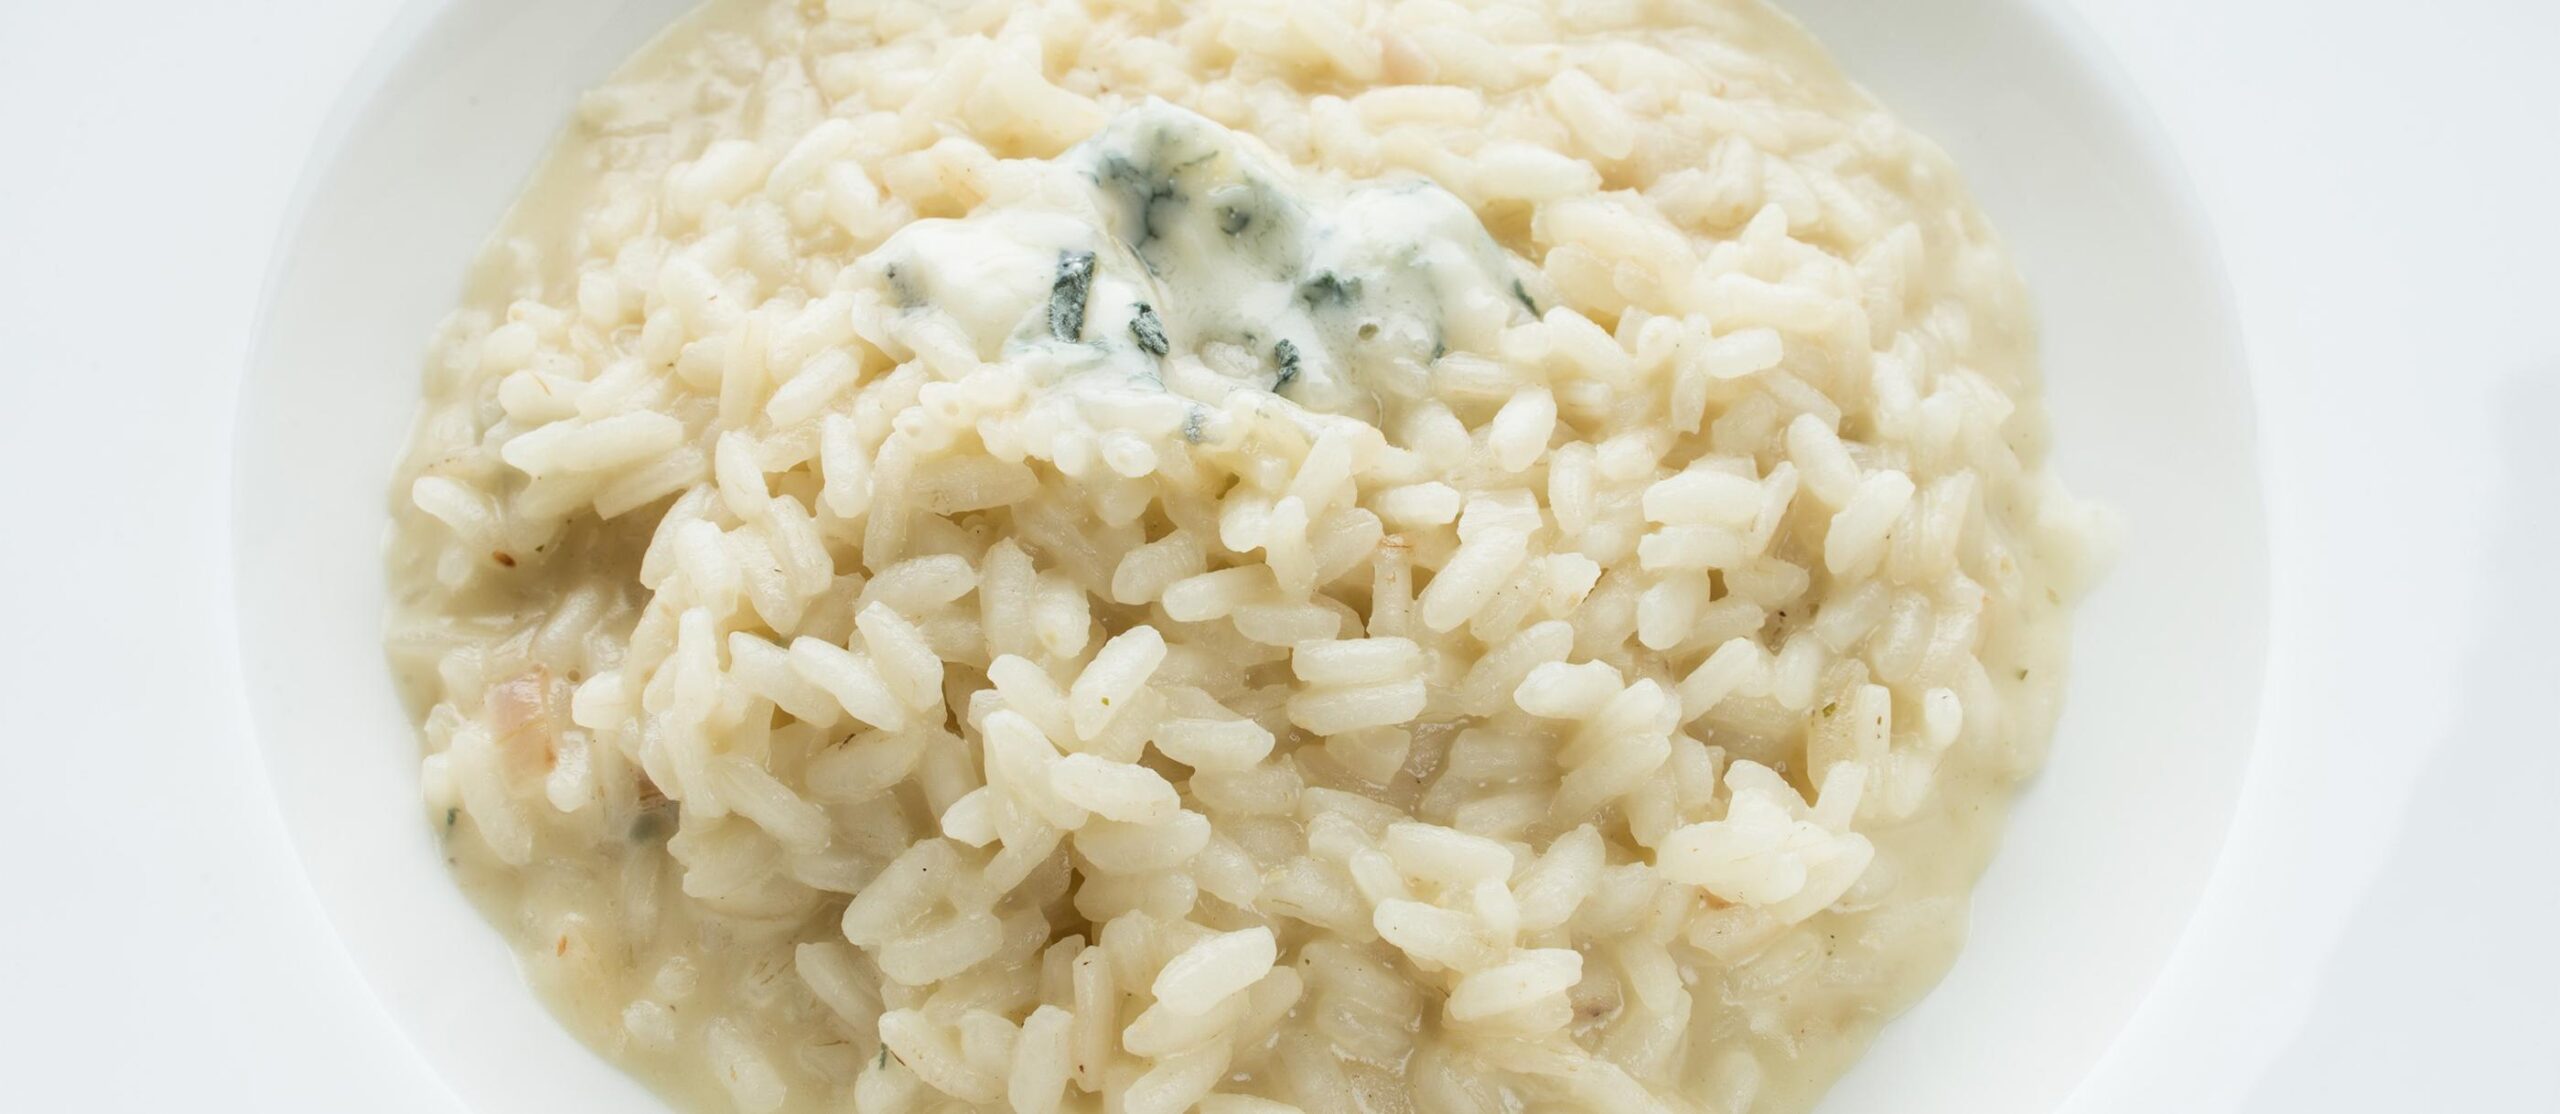  Perfectly cooked rice loaded with melted cheese – what's not to love?